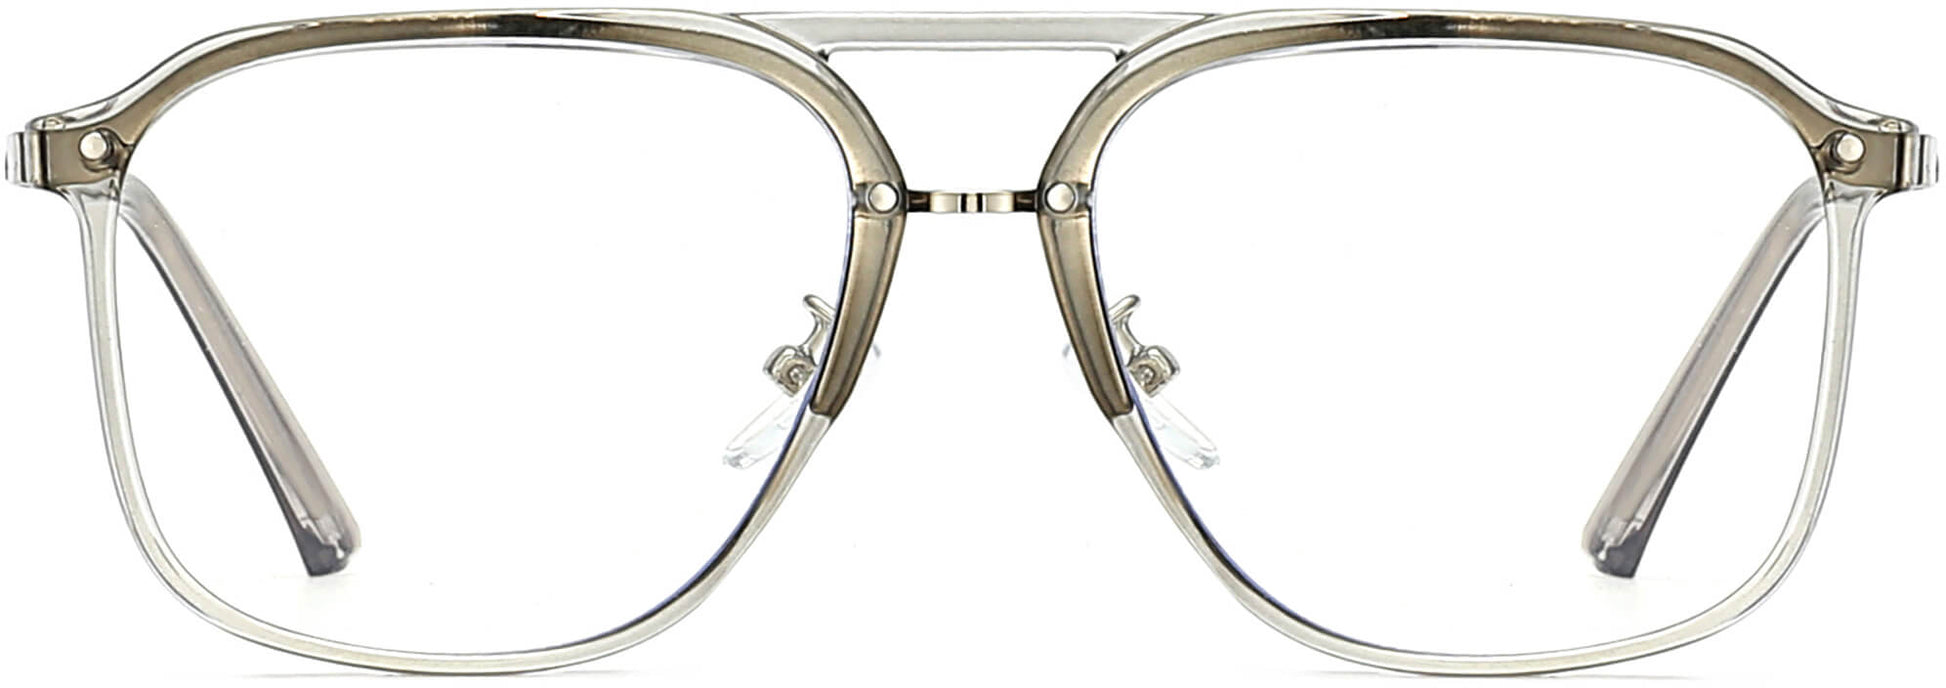 Donovan Square Gray Eyeglasses from ANRRI, front view